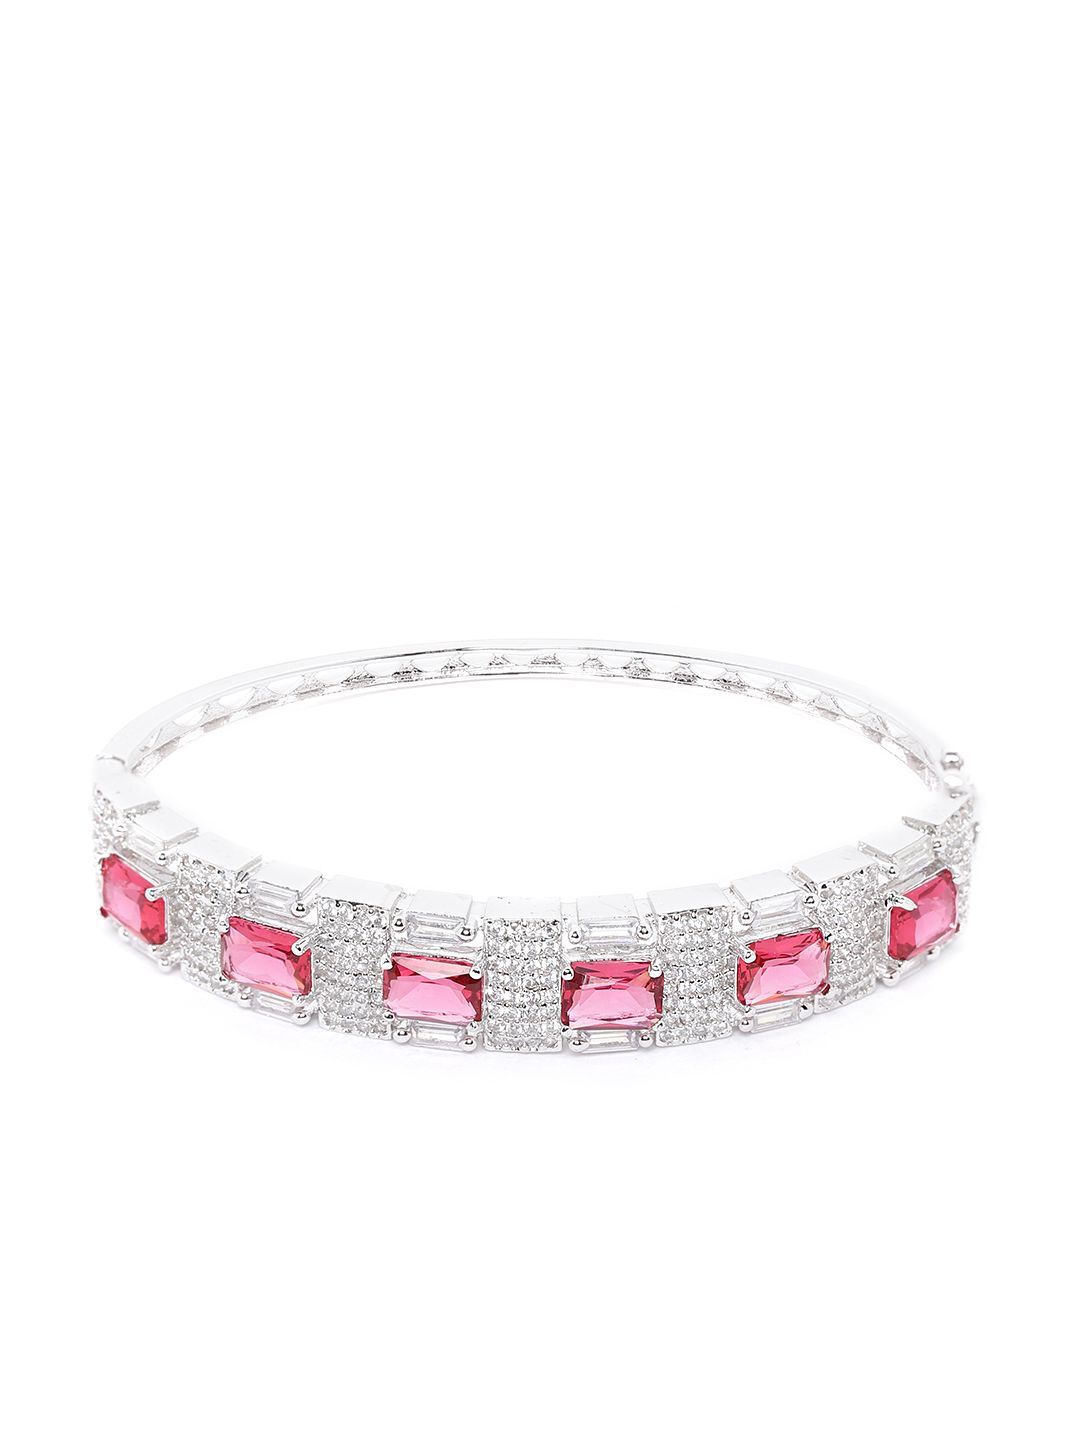 JEWELS GEHNA Magenta Silver-Plated AD-Studded Handcrafted Bangle-Style Bracelet Price in India